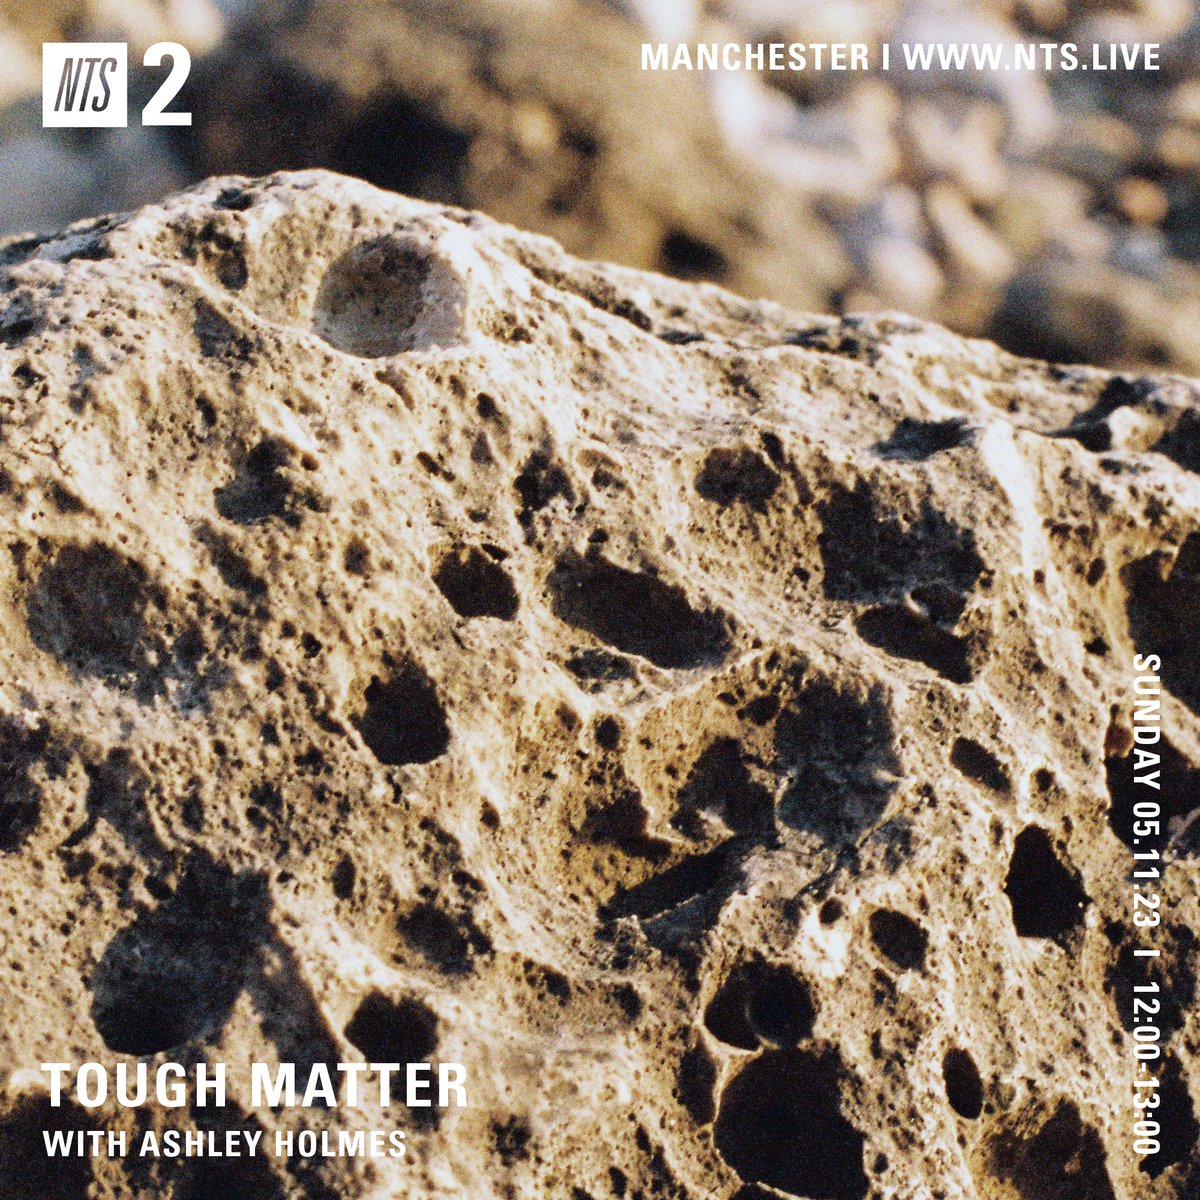 Tough Matter Sheffield's Ashley Holmes is live until 1pm on stream 2: nts.live/2